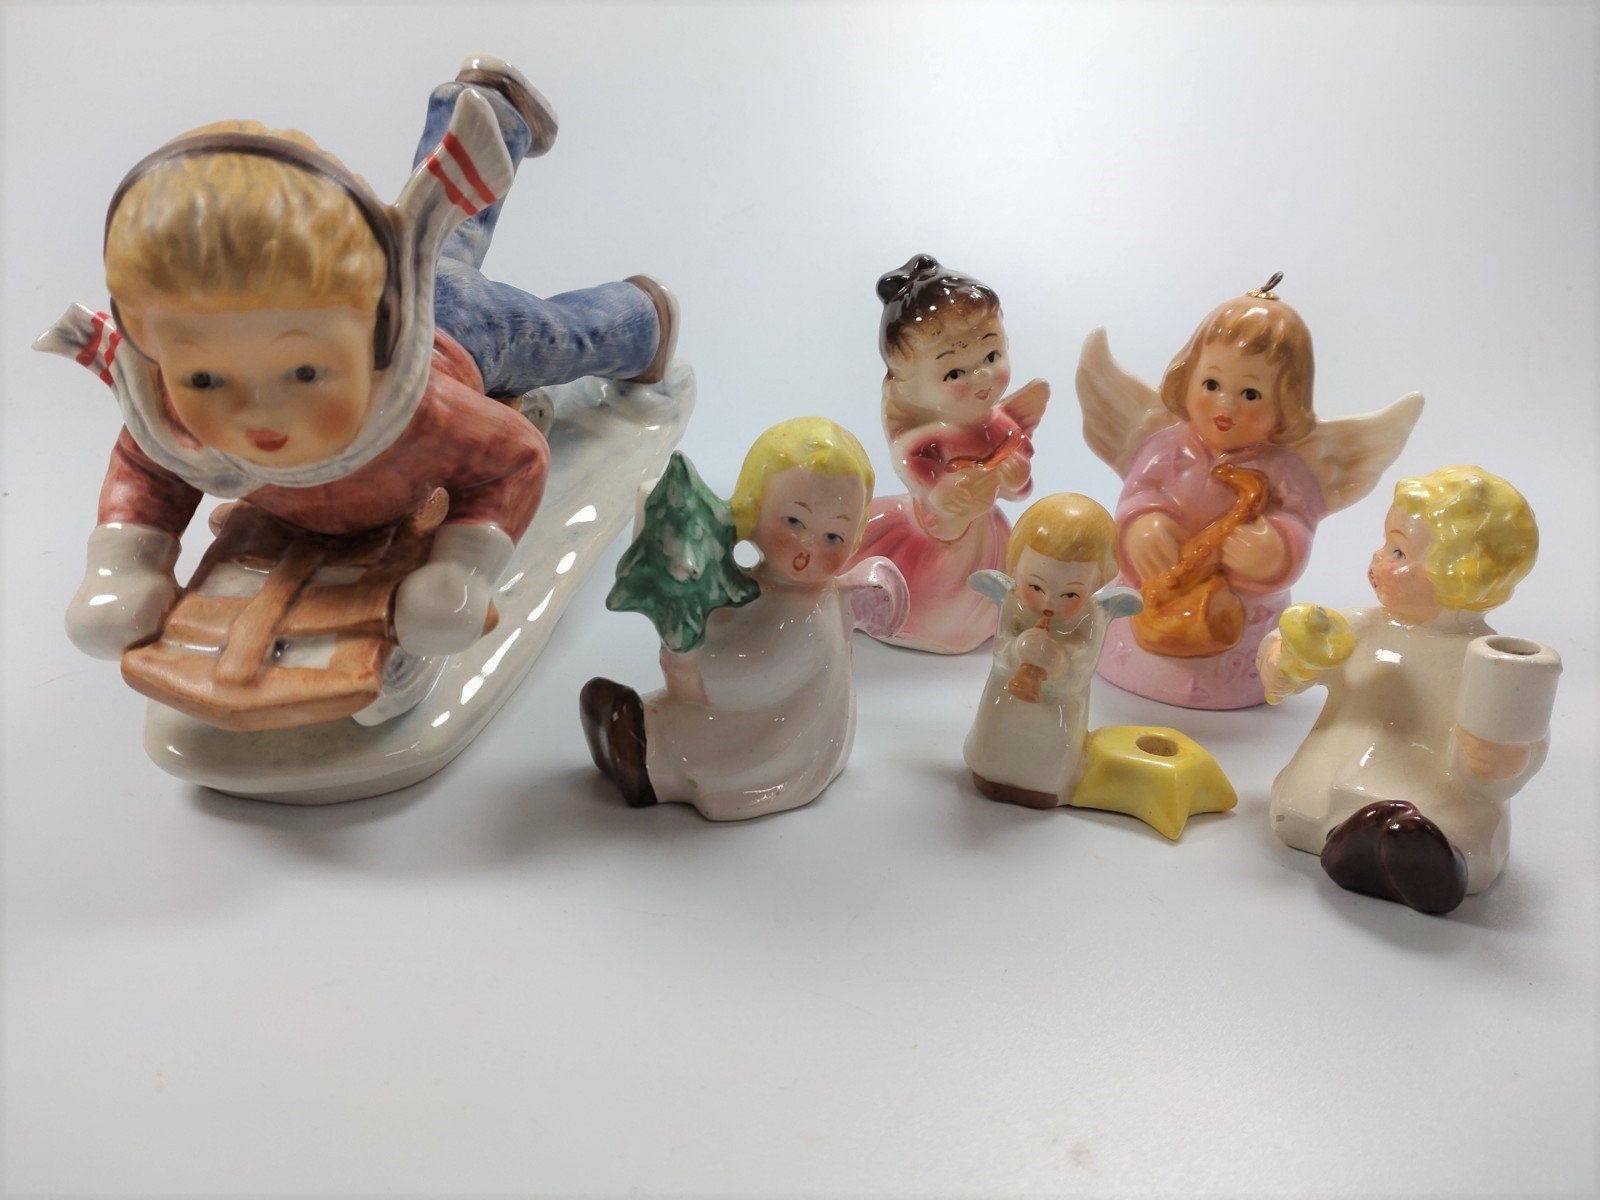 Goebel "Today's Children" figure of a boy on a sled, together with five children Christmas angels